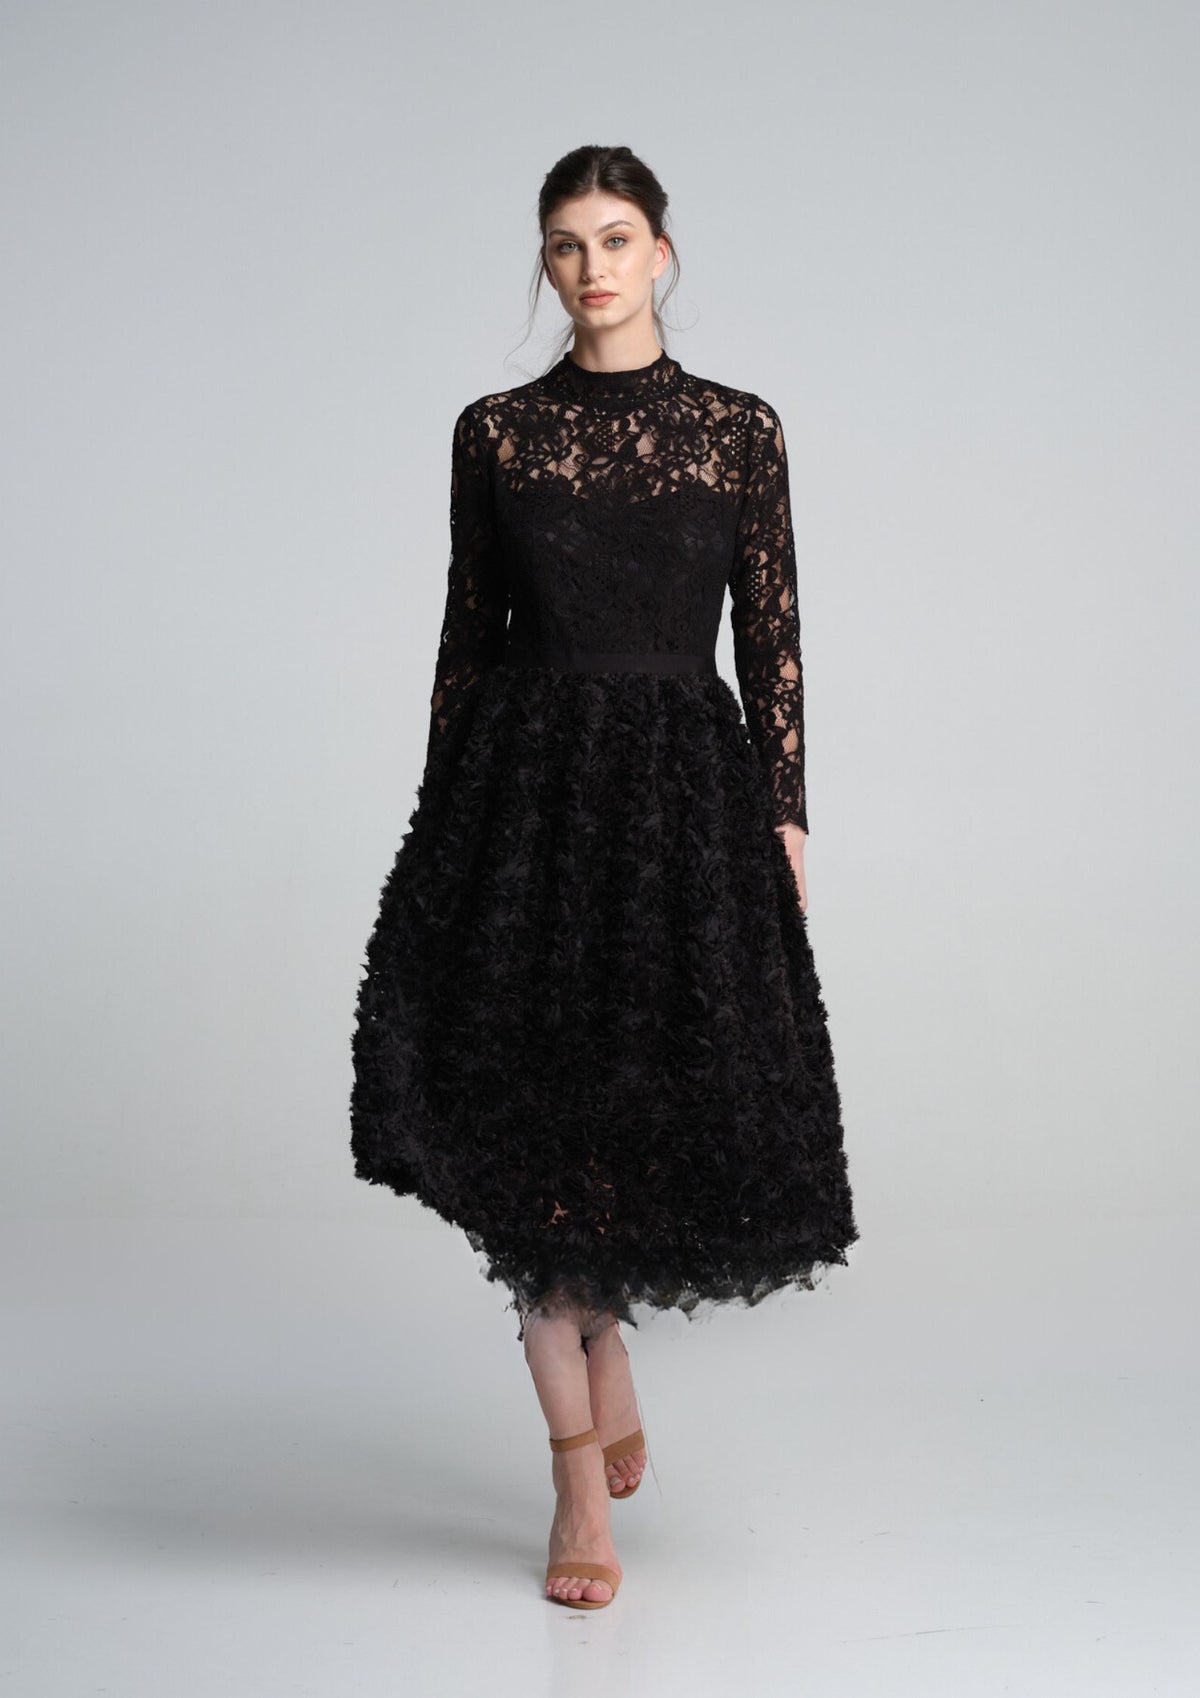 Midi dress with lace bodice and ruffled-tulle skirt